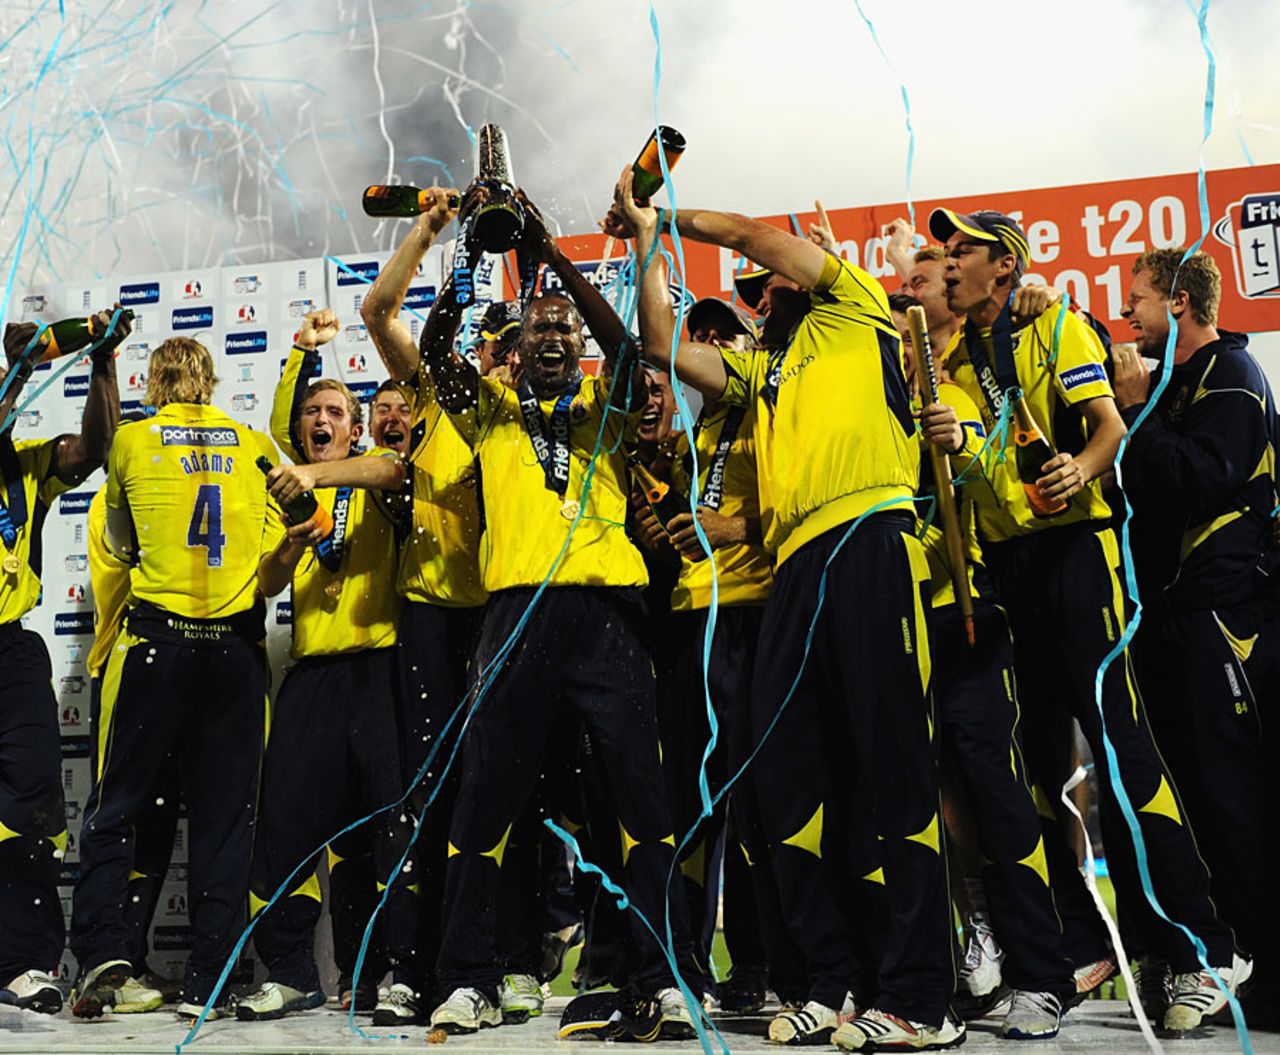 Hampshire celebrate their Friends Life t20 title, Yorkshire v Hampshire, Friends Life t20 final, August 25, 2012